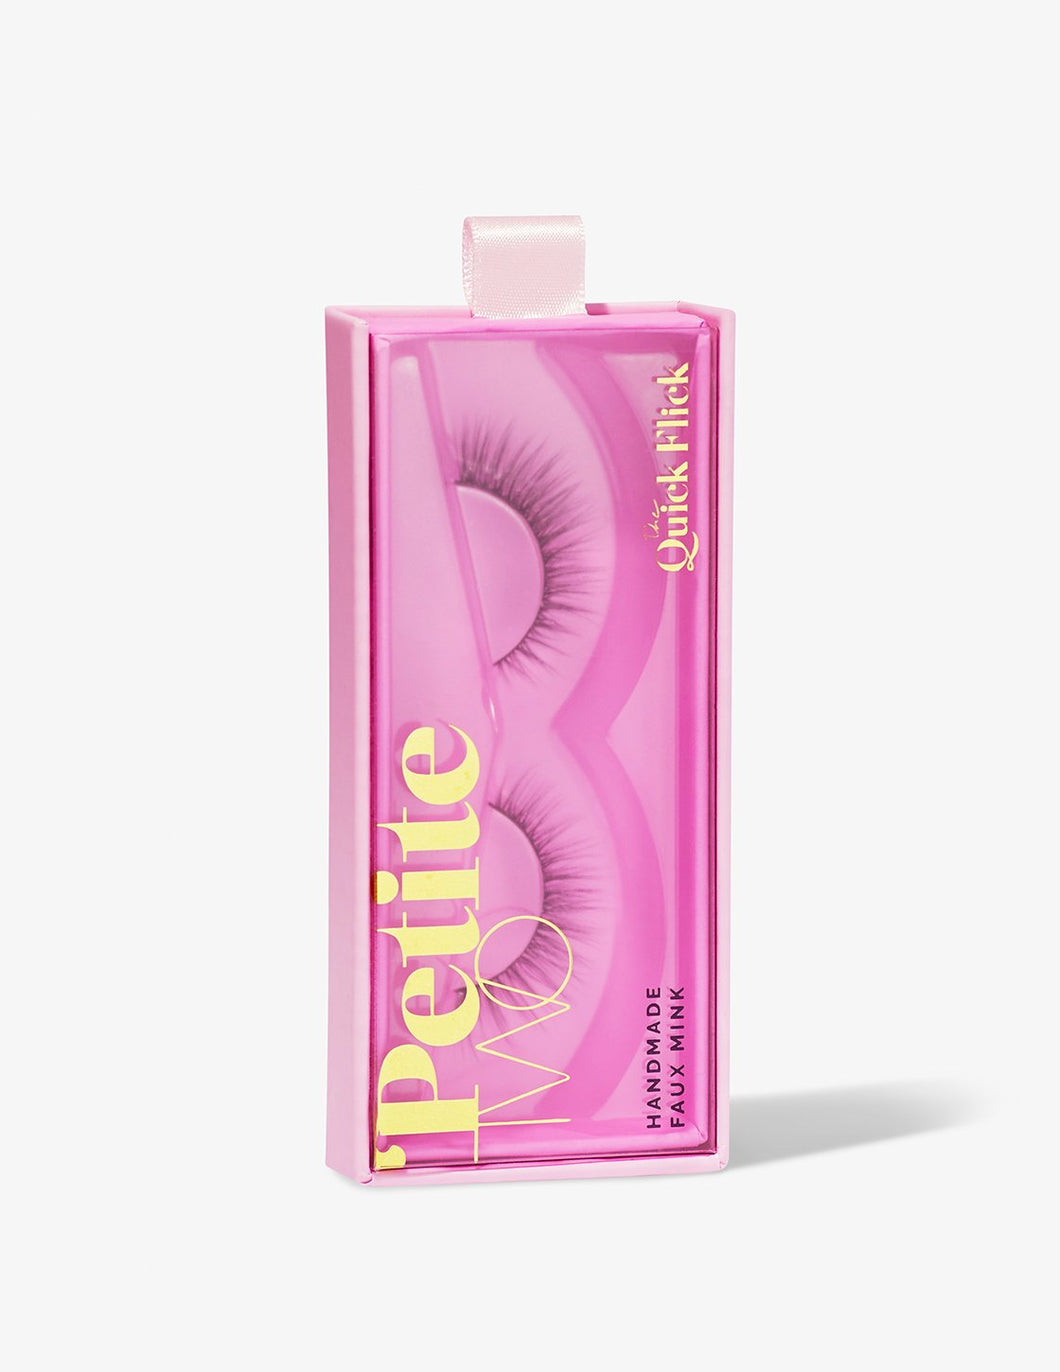 Clean Beauty Society - The Quick Flick Petite One Eye Lashes (6572751224866)